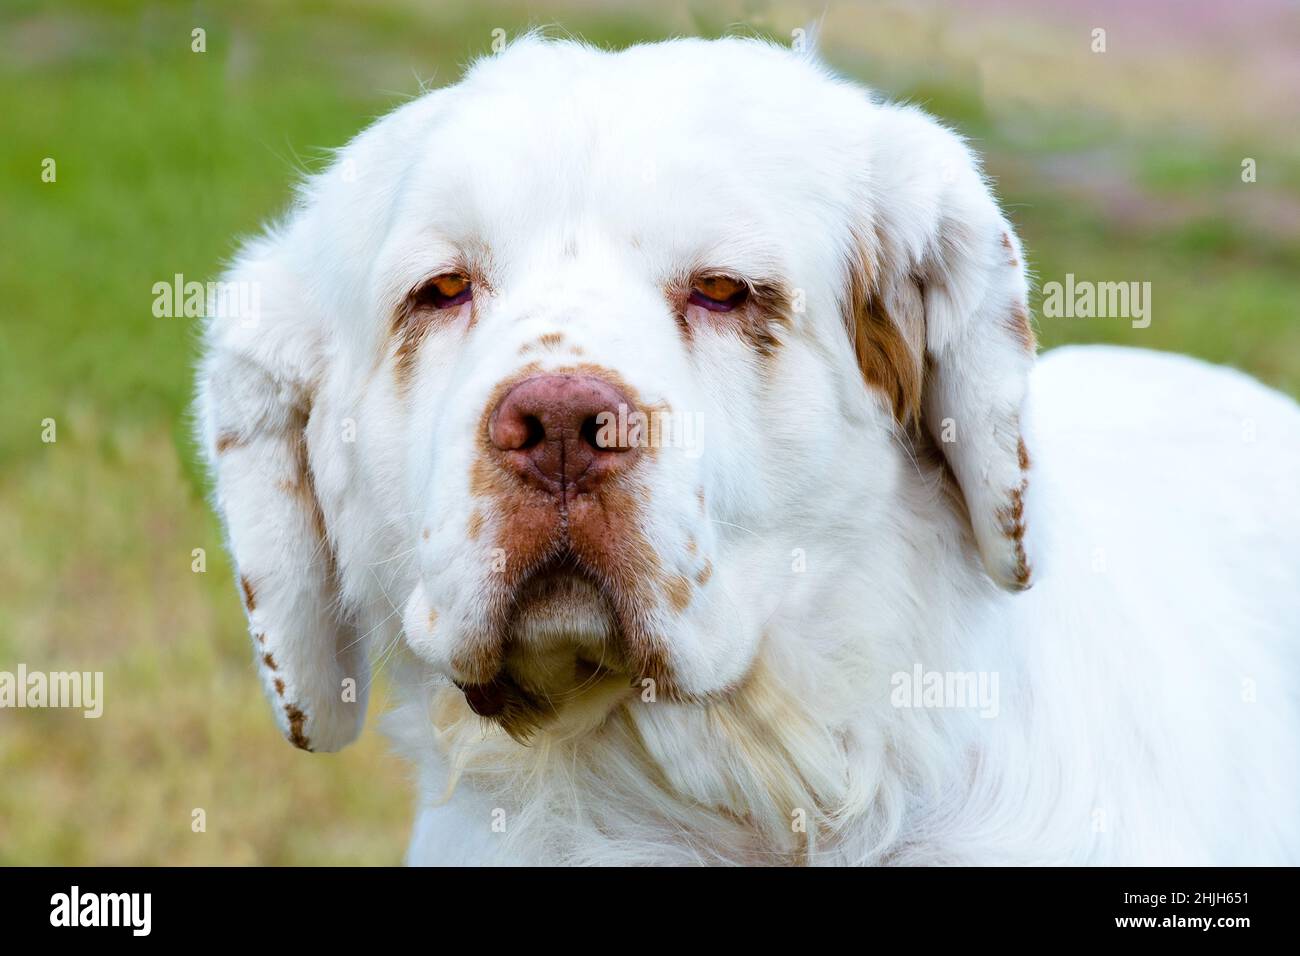 Clumber Spaniel full face portrait. The Clumber Spaniel stands on the grass in the park. Stock Photo